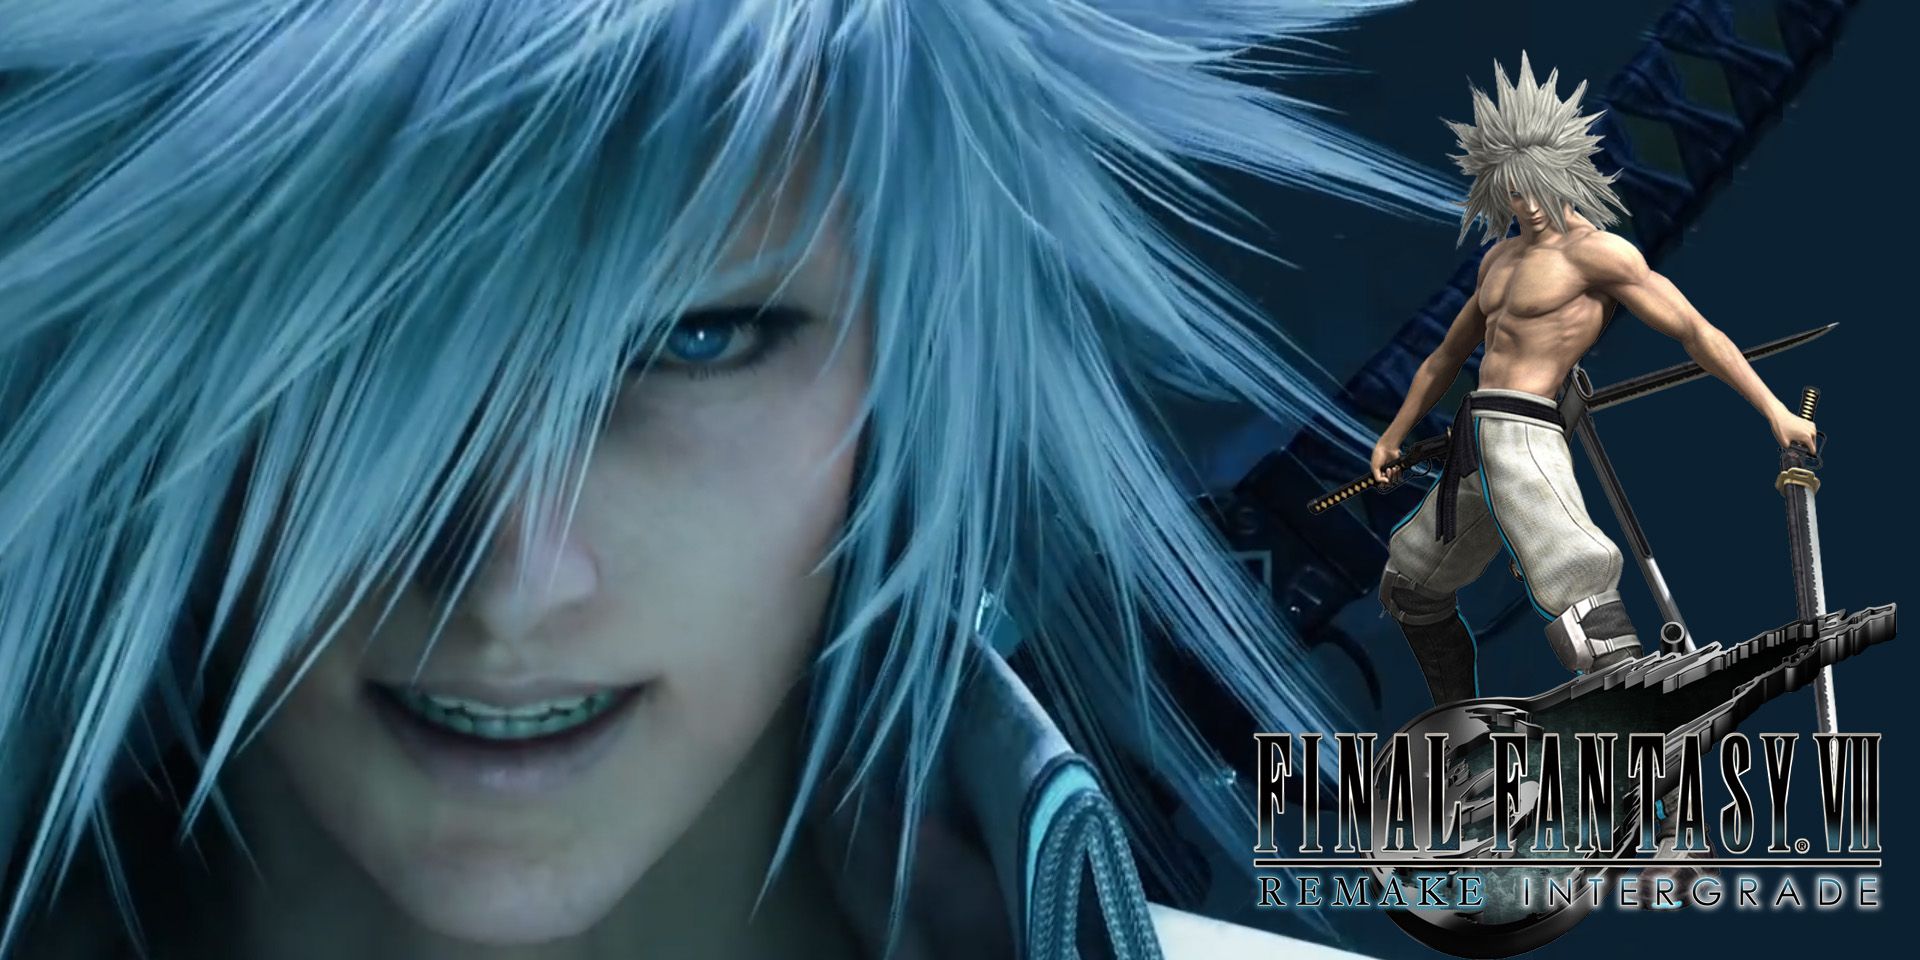 Weiss from the trailer for Final Fantasy VII Remake Intergrade